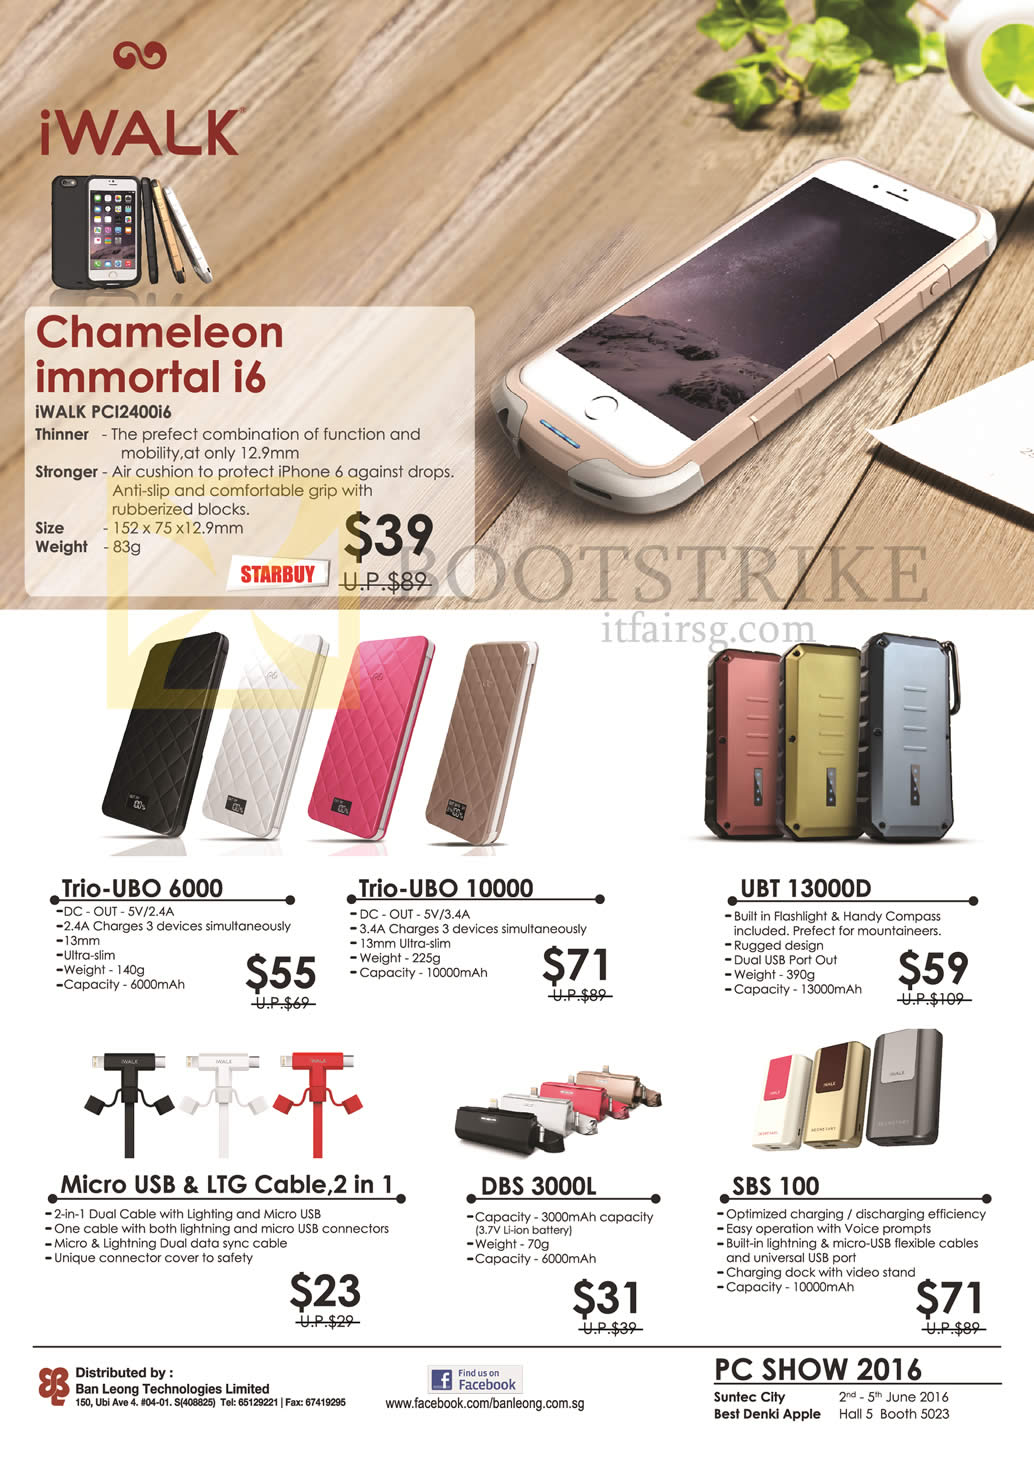 PC SHOW 2016 price list image brochure of Best Denki IWalk IPhone Cases, Chameleon Immortal I6, Trio-UBO 6000, Cable, Power Banks